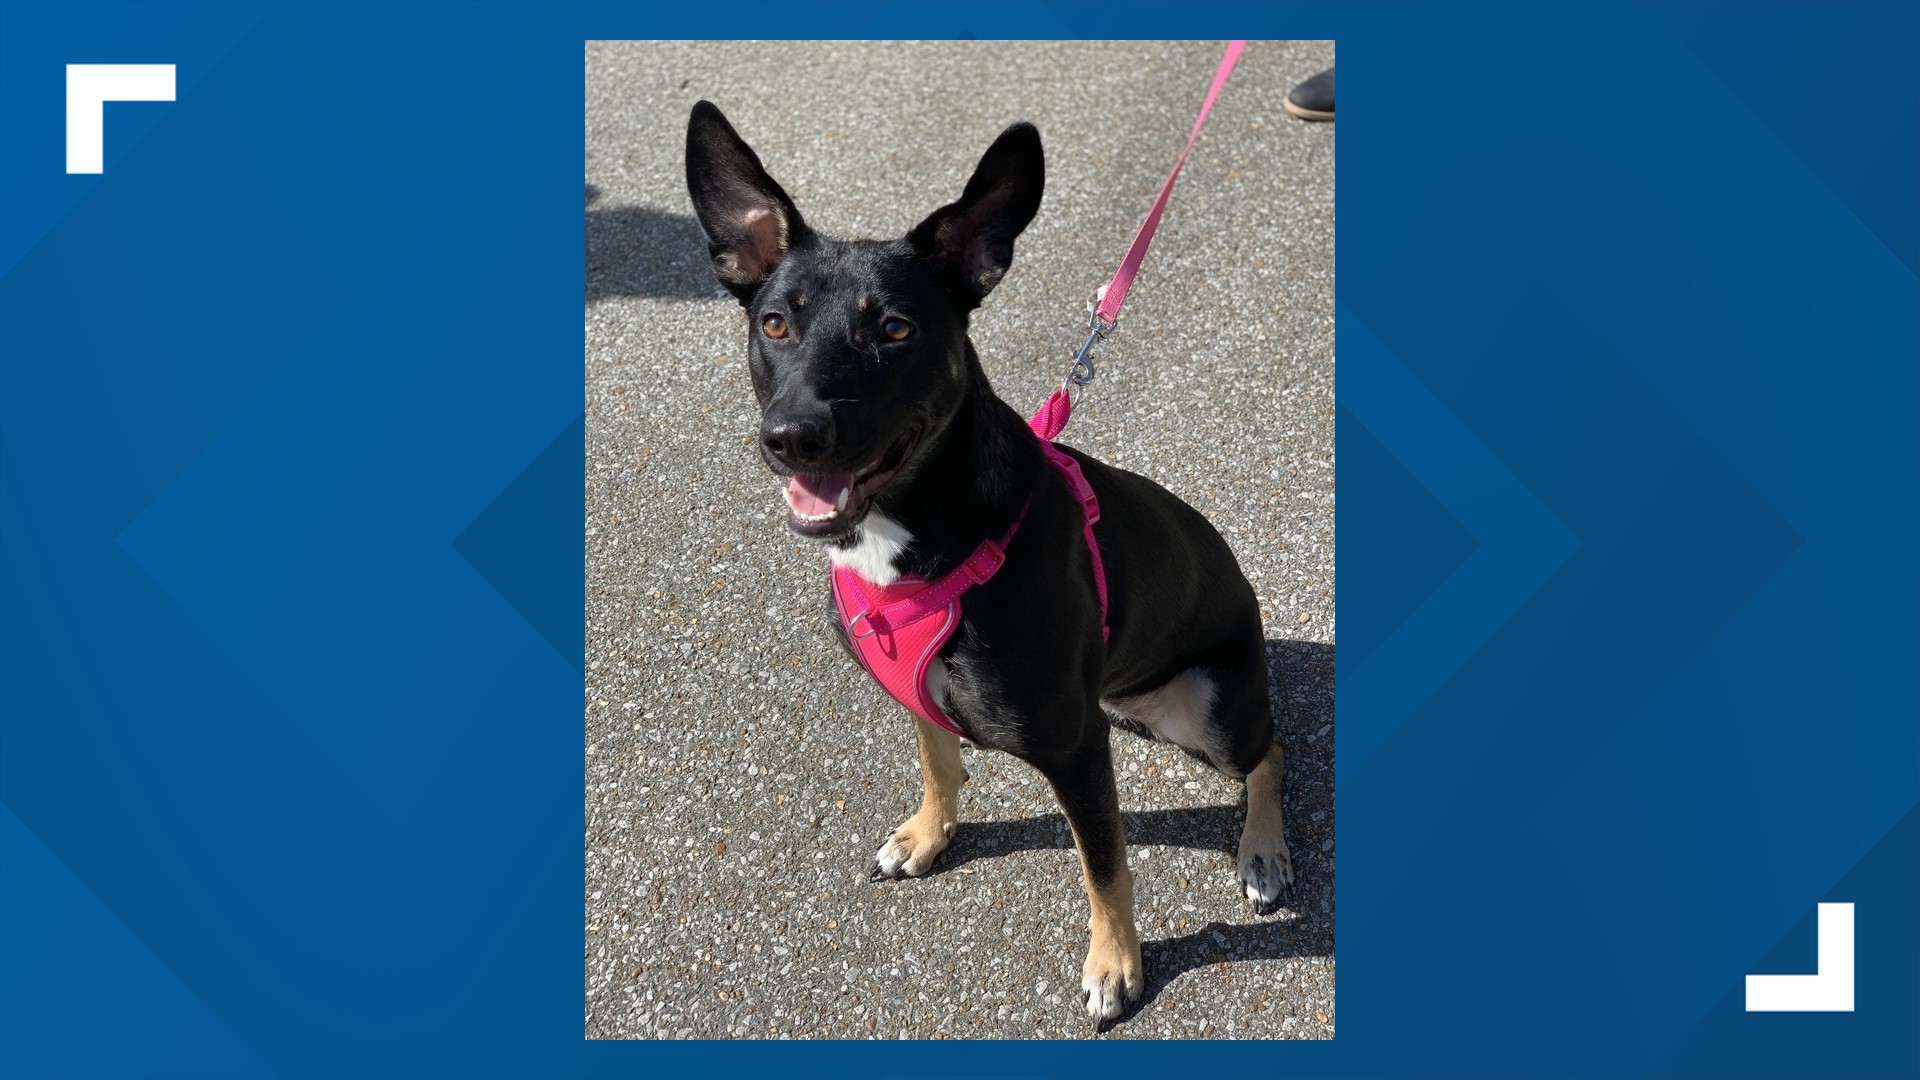 Bella is a "velcro" dog who loves snuggling, playing with her people, and car rides, according to Charlie's Crusaders Pet Rescue.